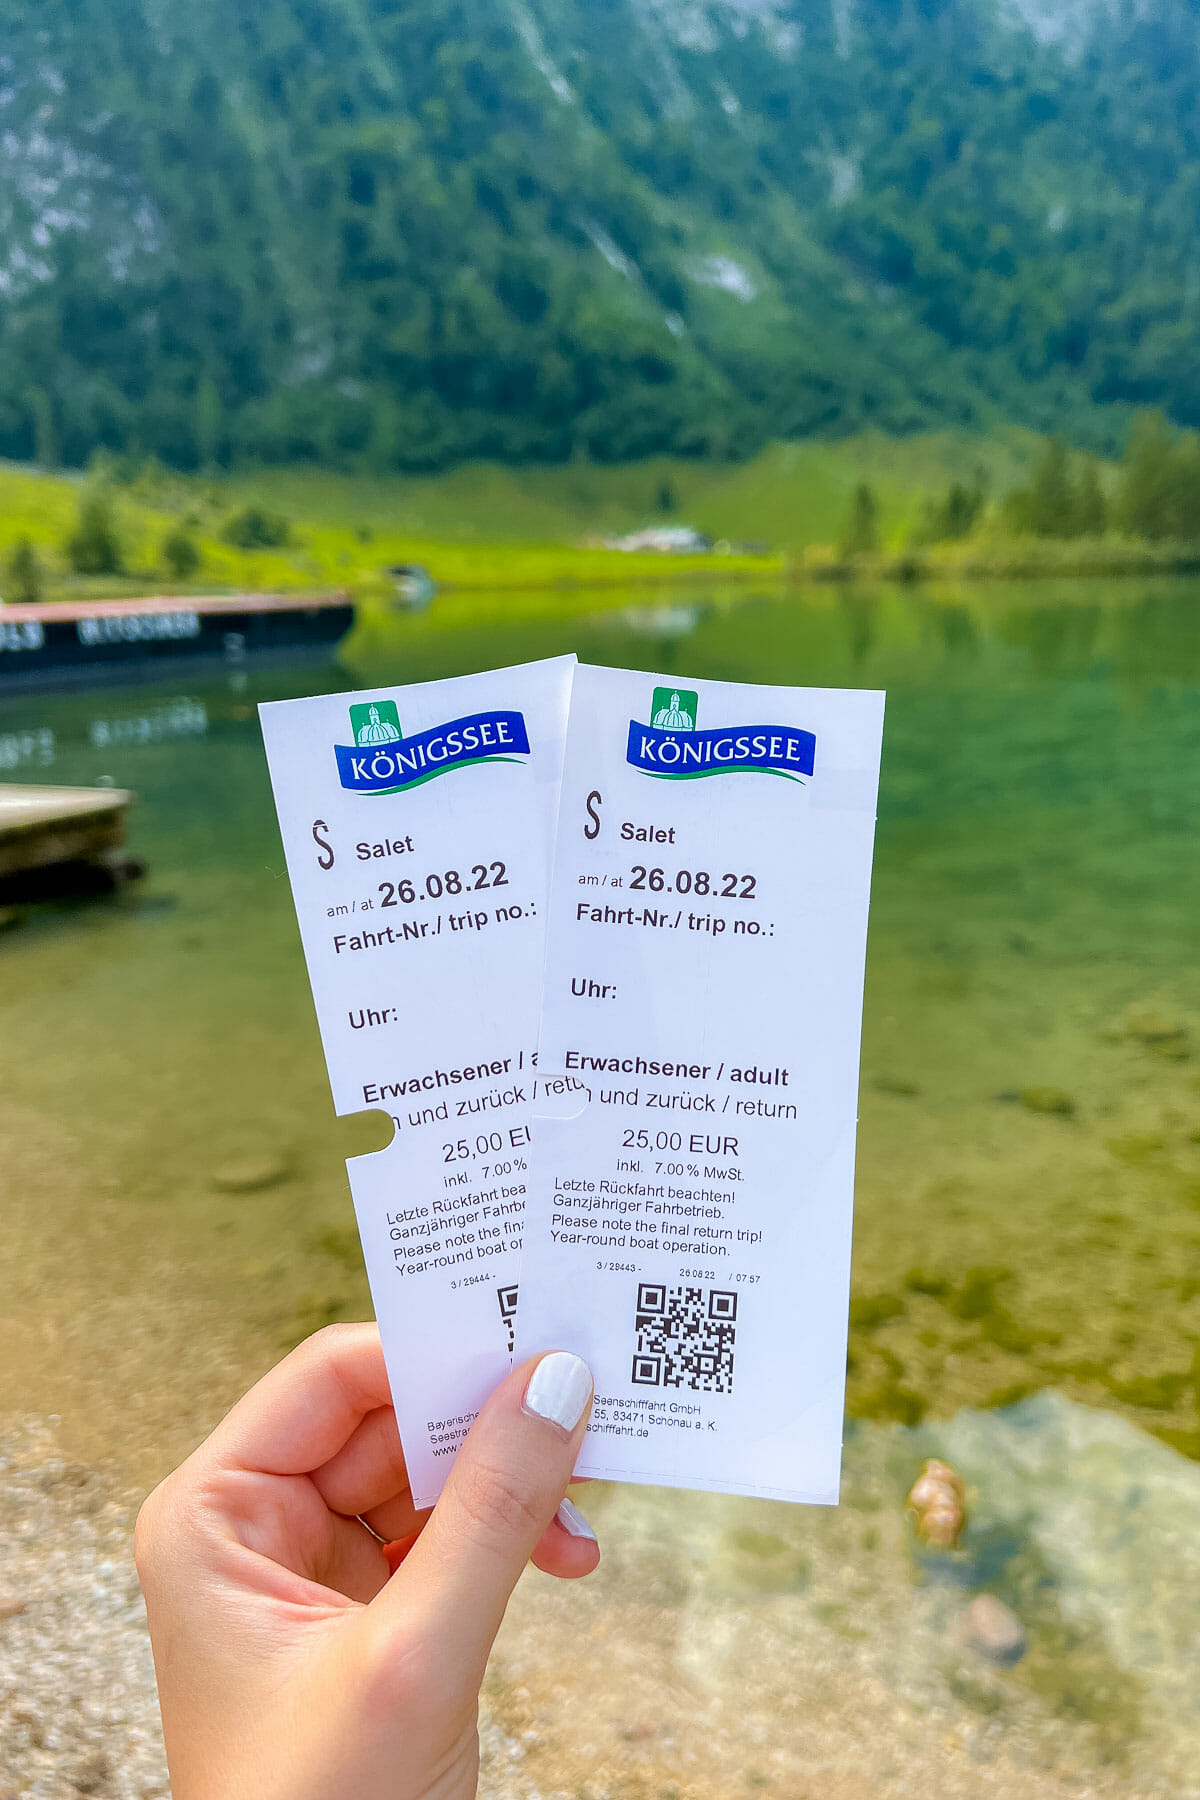 Boat tickets to Königssee Lake